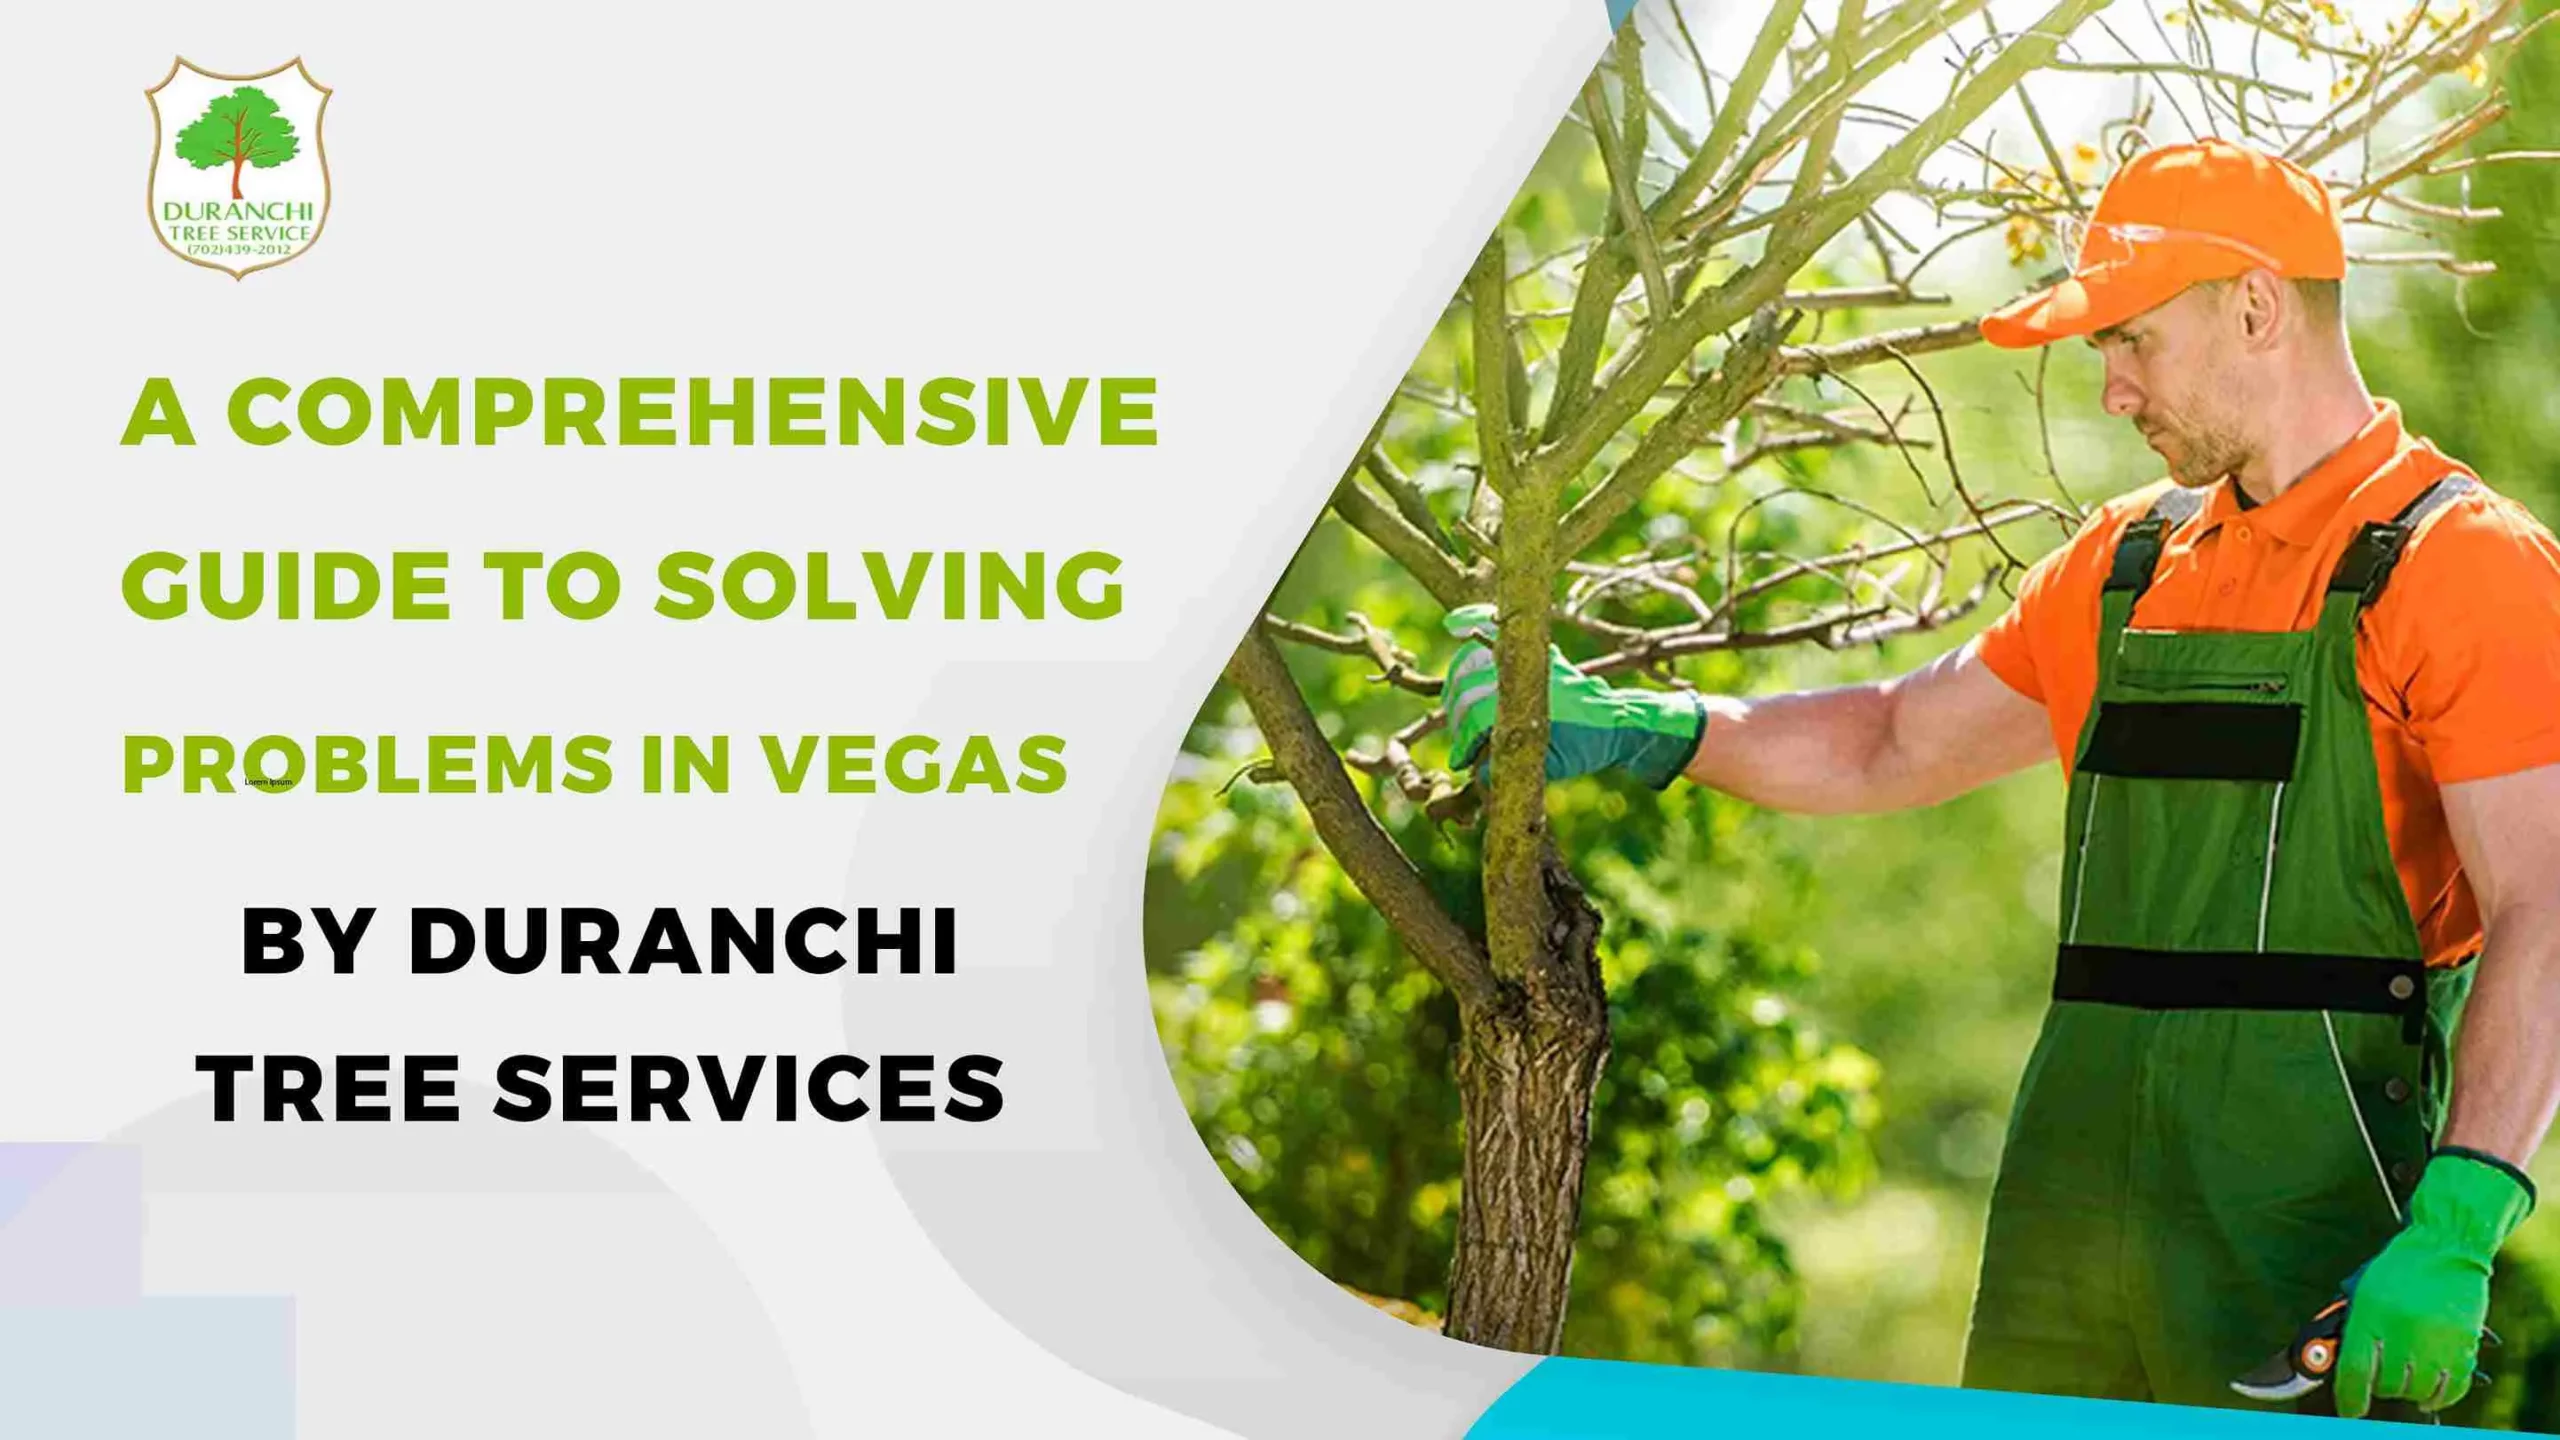 A Comprehensive Guide to Solving Tree Problems in Vegas by Duranchi Tree Services